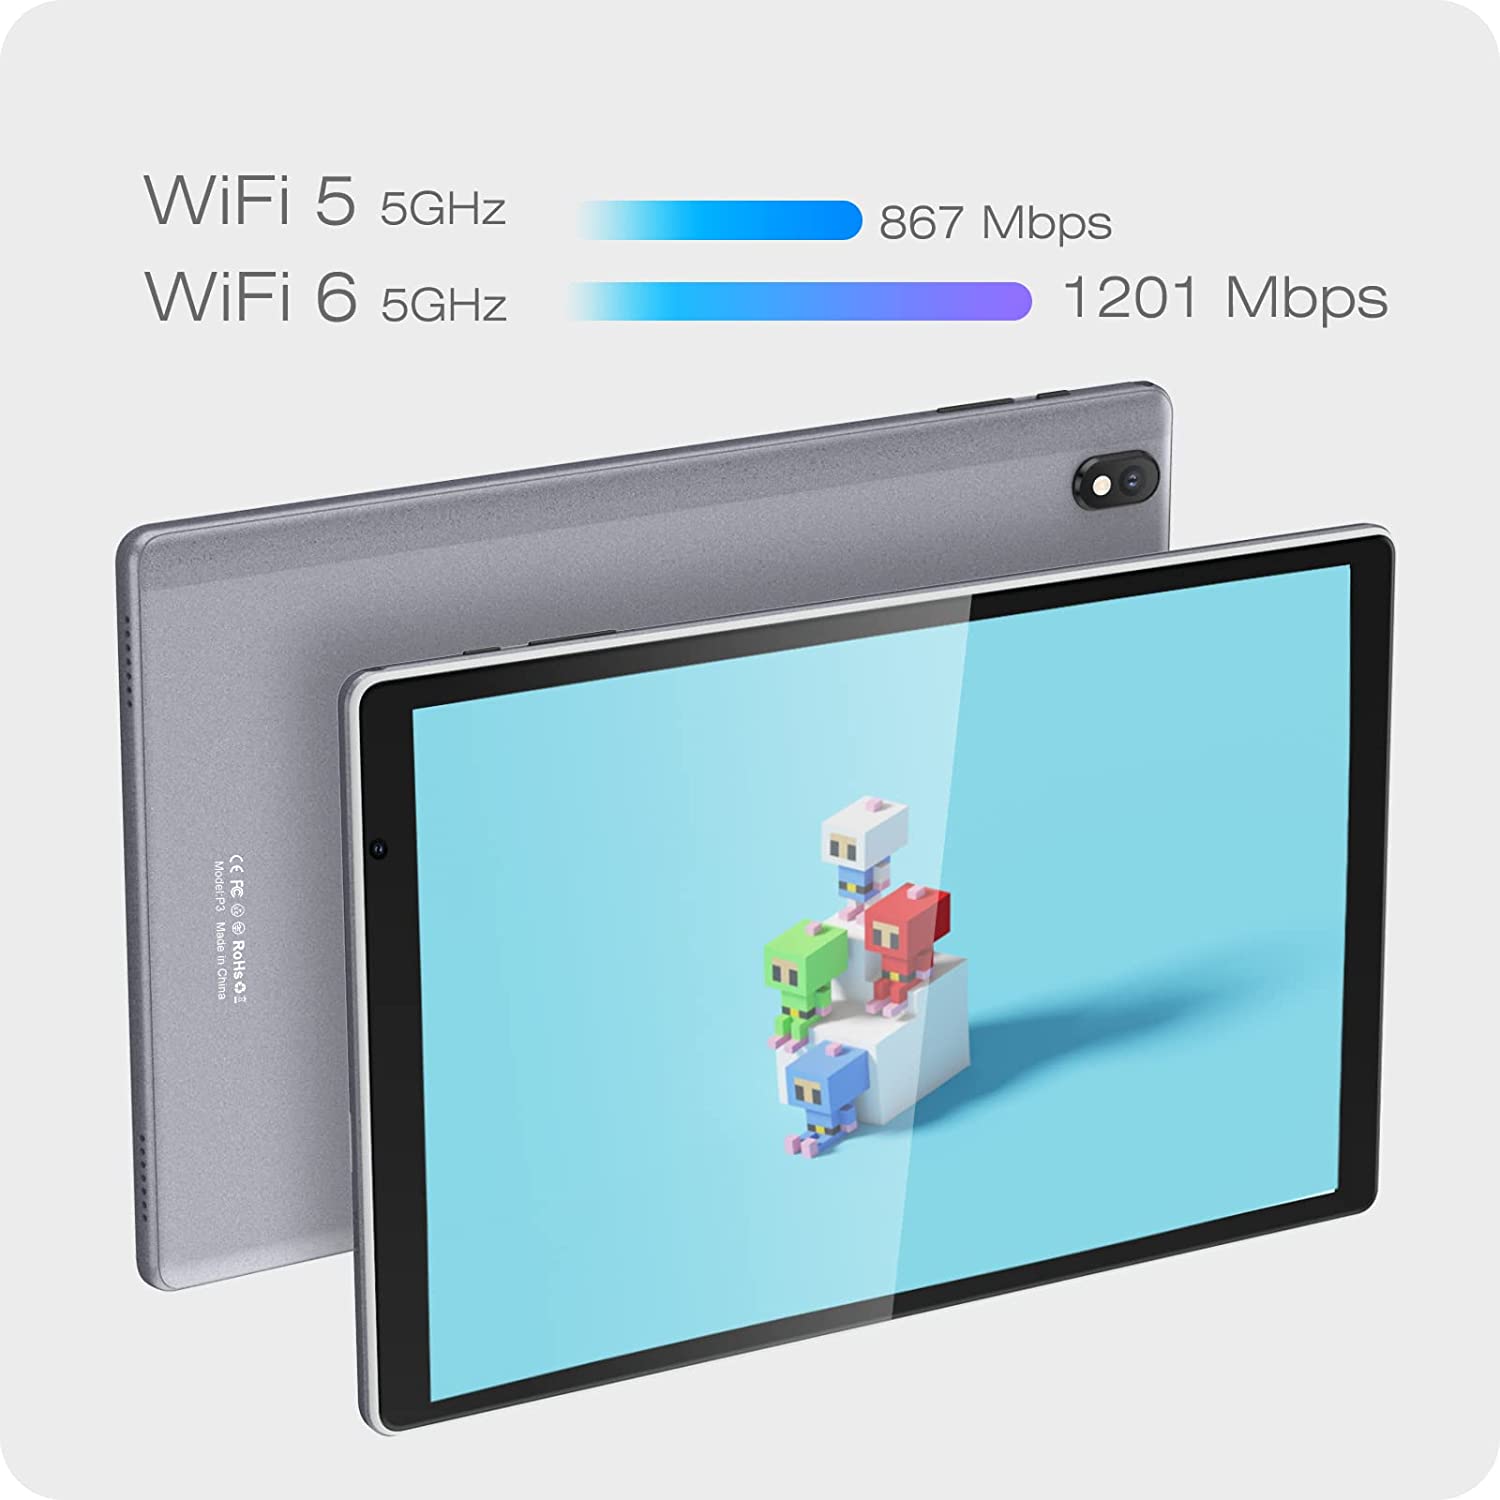 Android Tablet 10.1 inch,  PlimPad P3 (Gray)